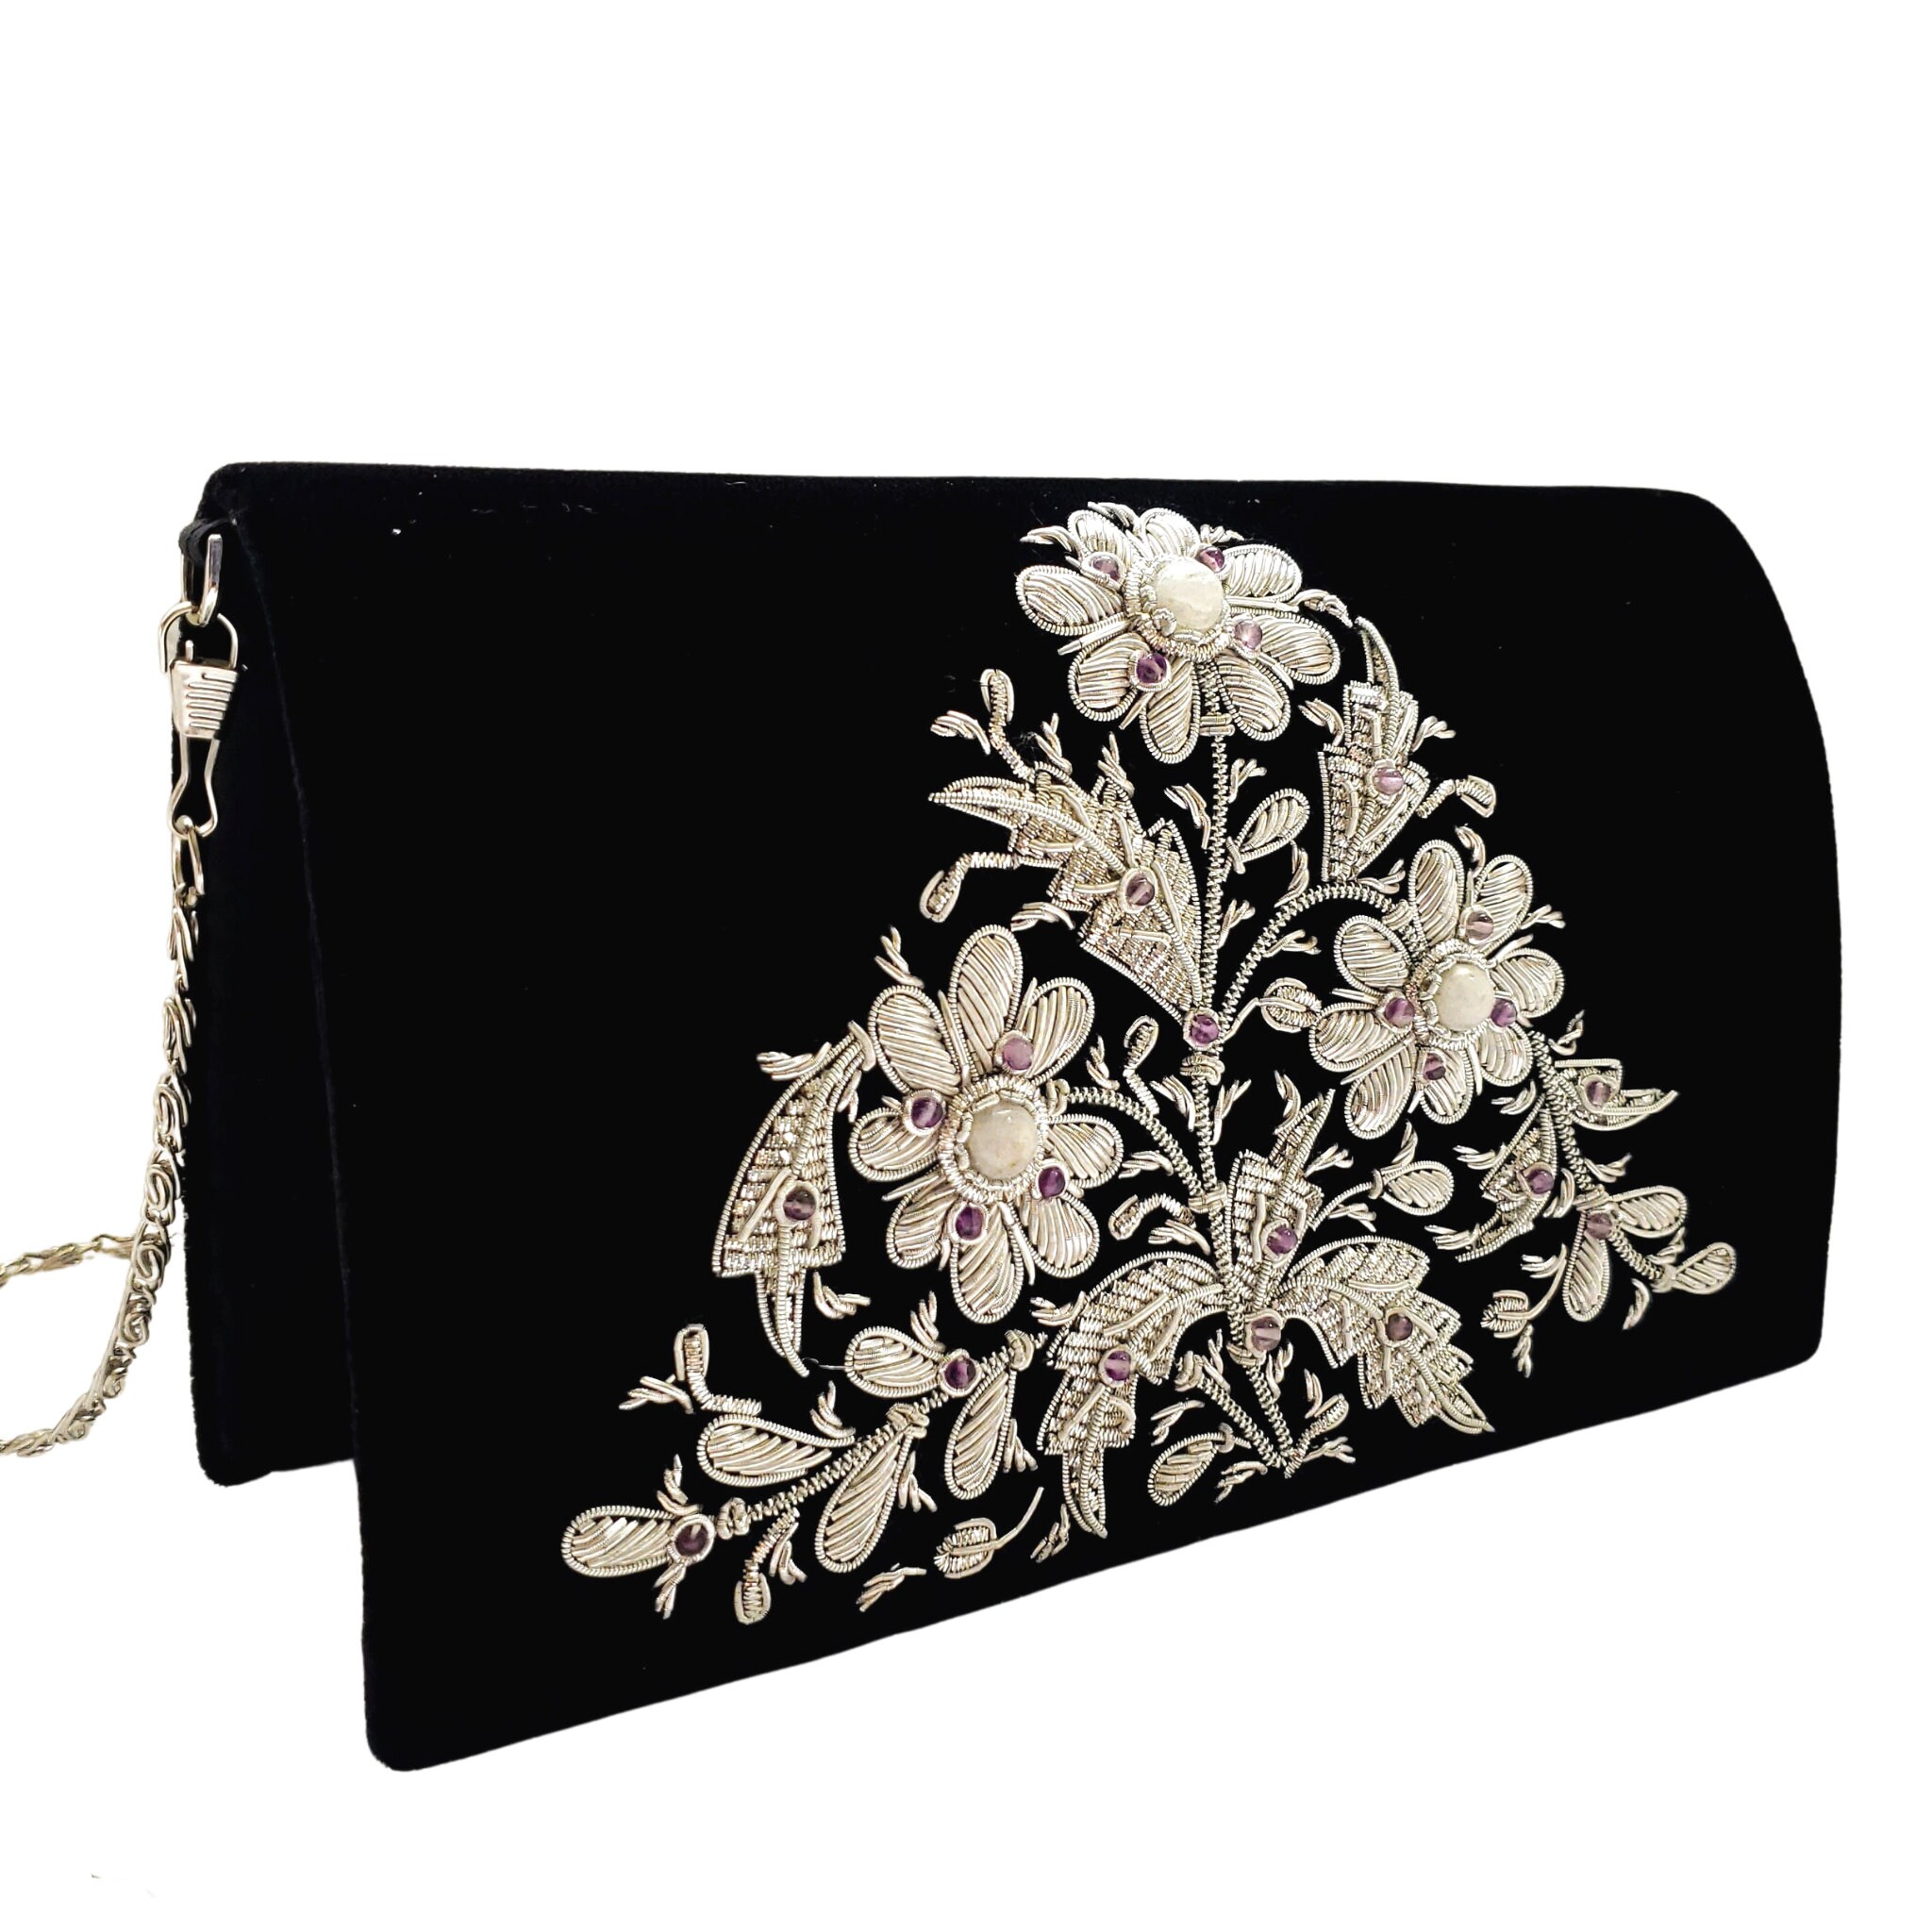 Exclusive Embroidered velvet bag 370.00 EUR - Buy clothes